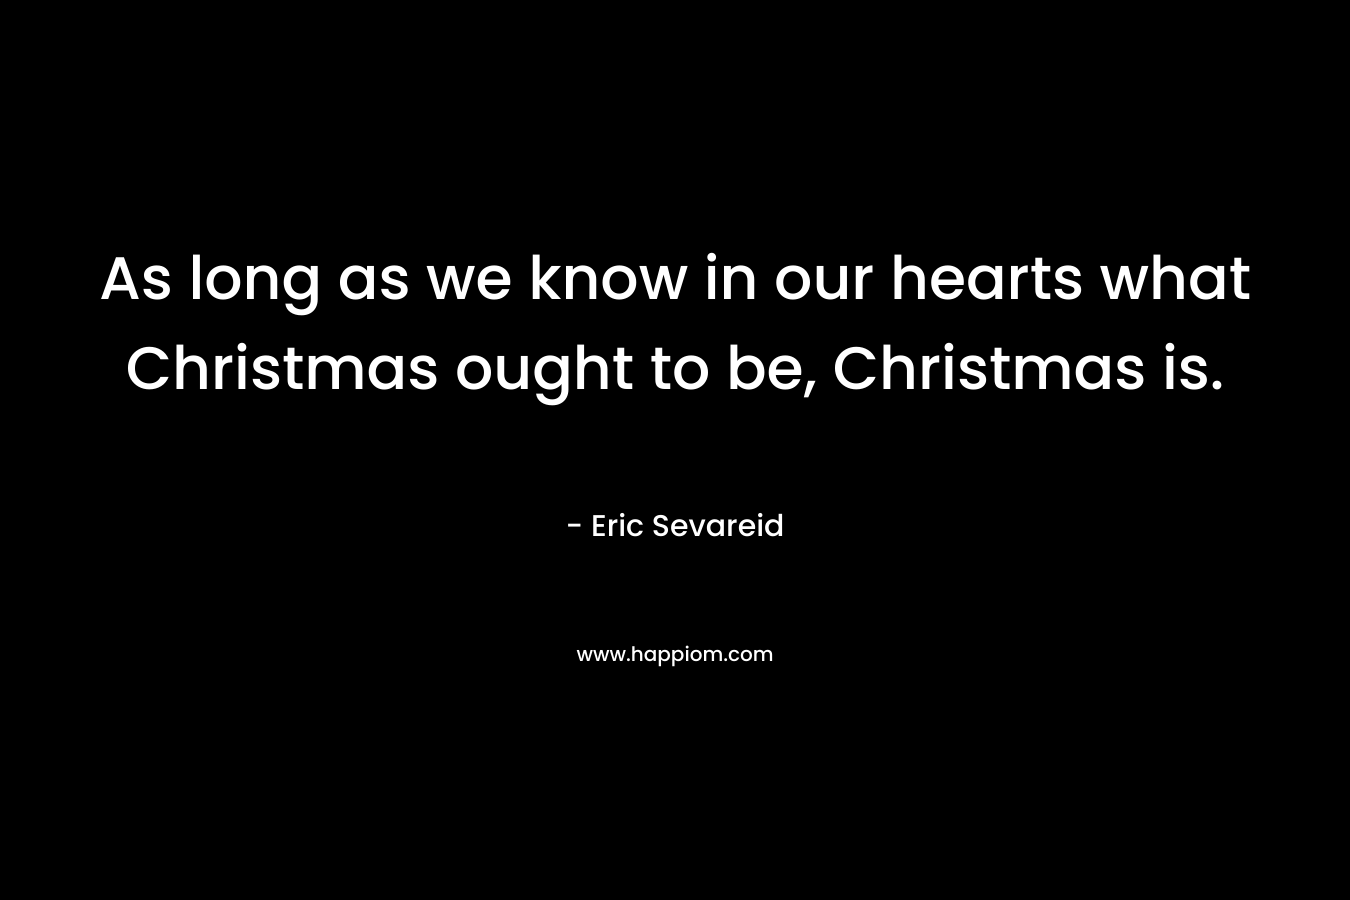 As long as we know in our hearts what Christmas ought to be, Christmas is. – Eric Sevareid